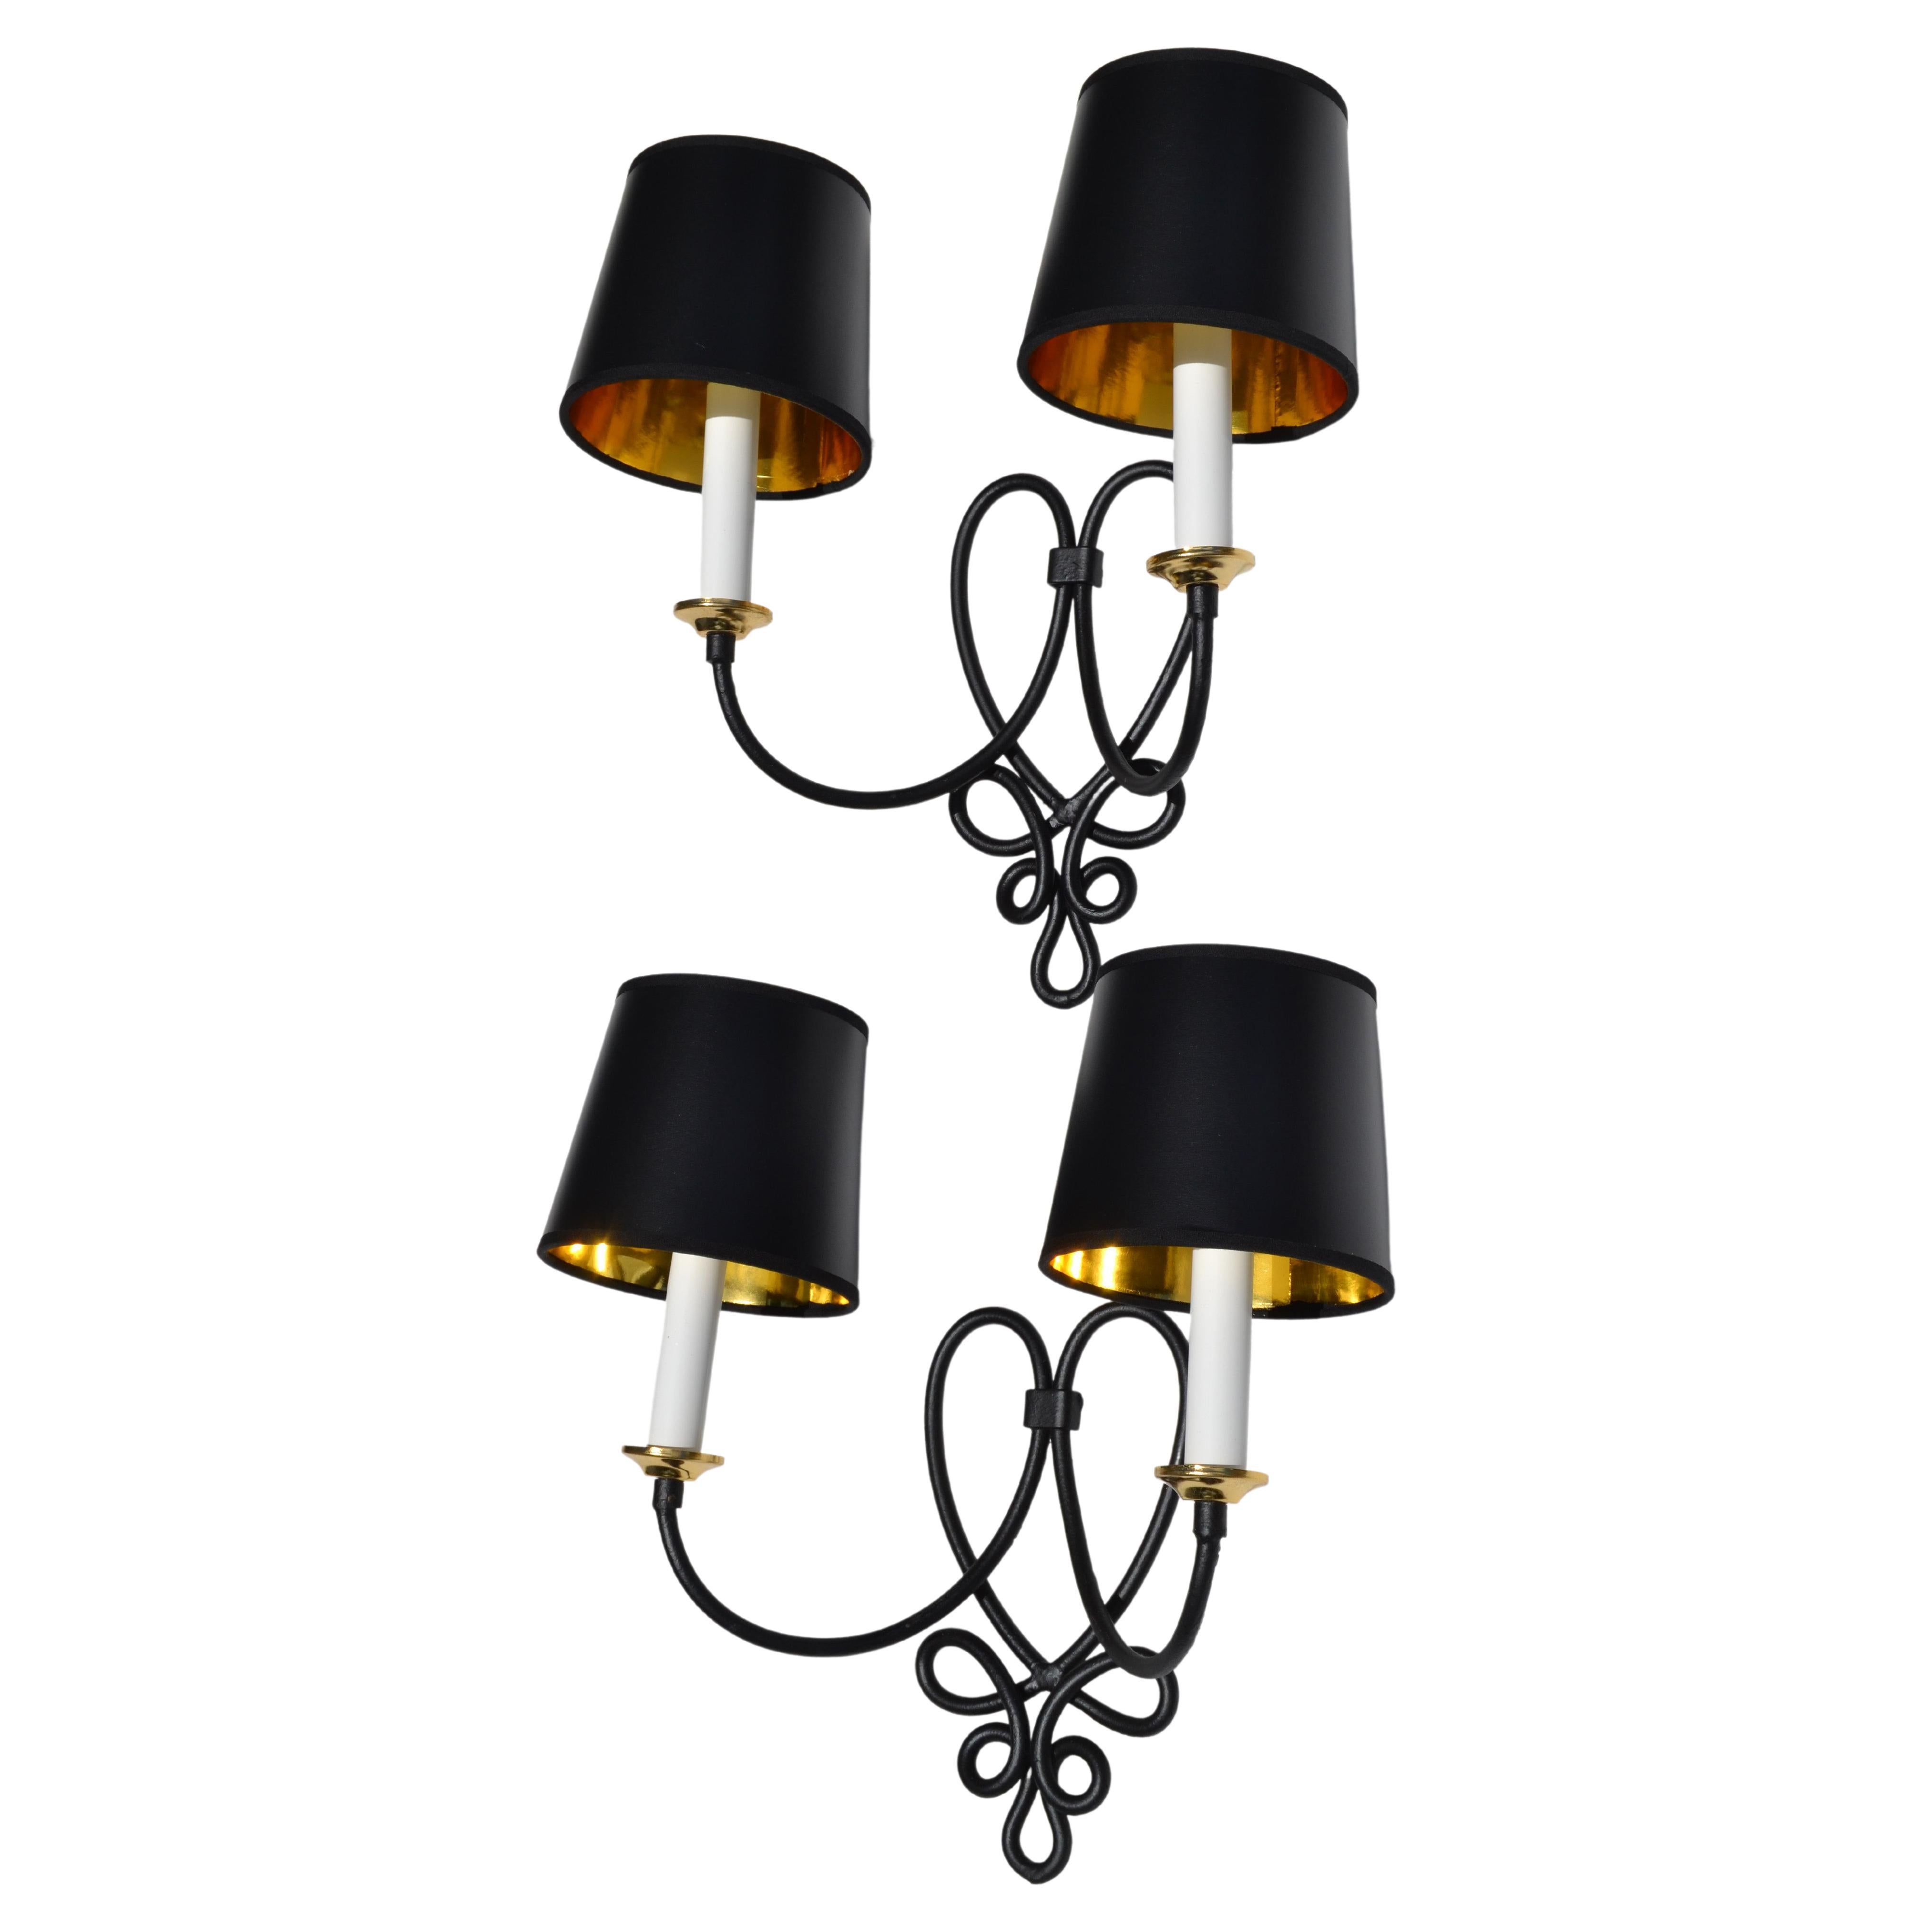 Art Deco Pair, Rene Prou French 2 Lights Wrought Iron & Brass Wall Sconces Black Finish For Sale